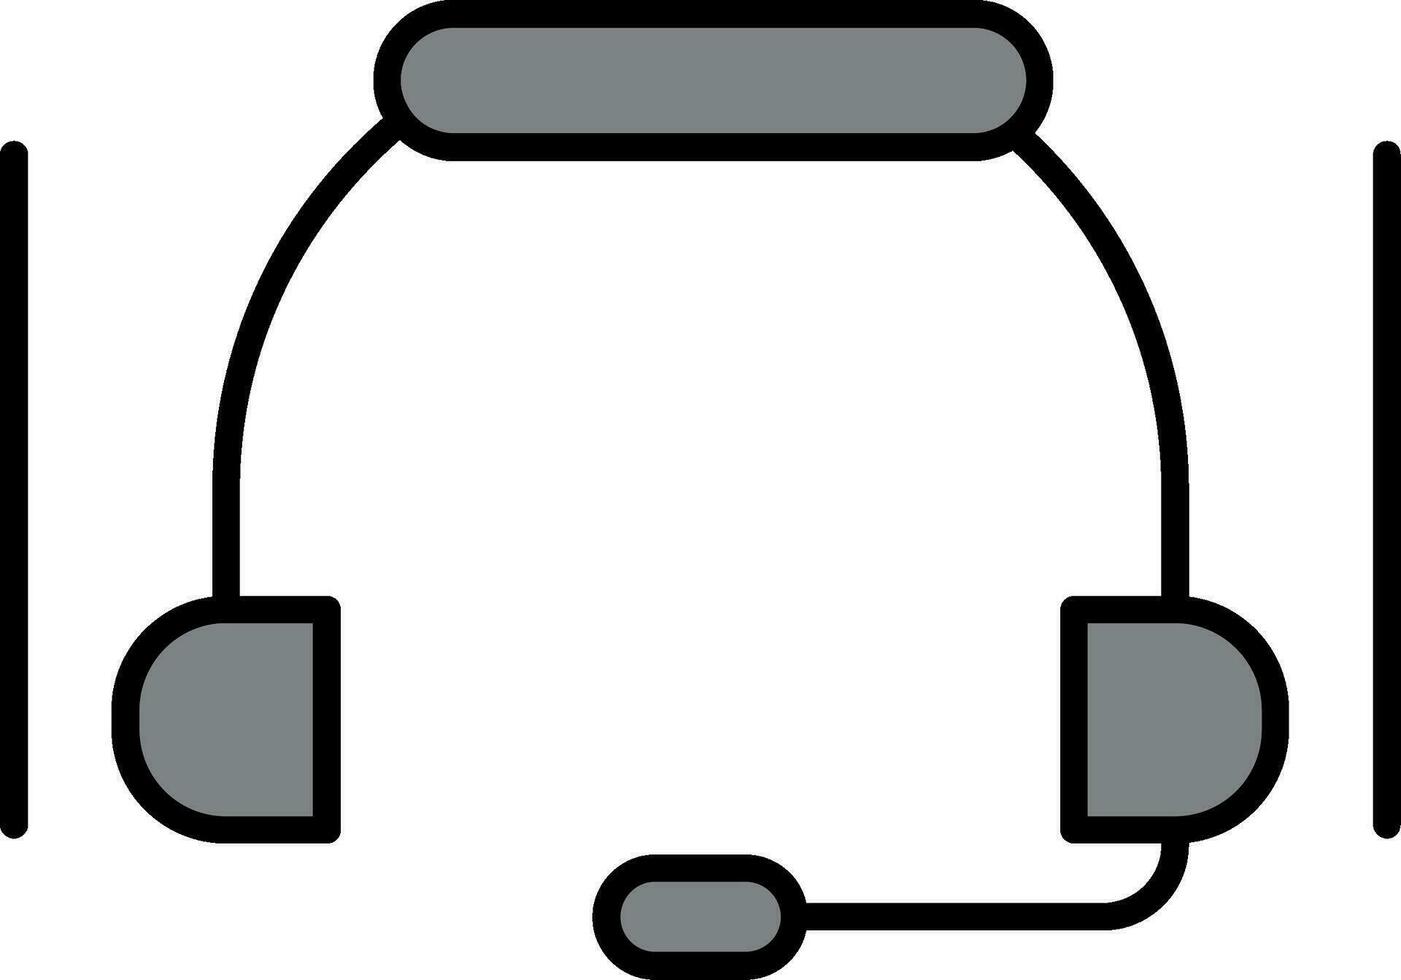 Headset Line Filled Icon vector